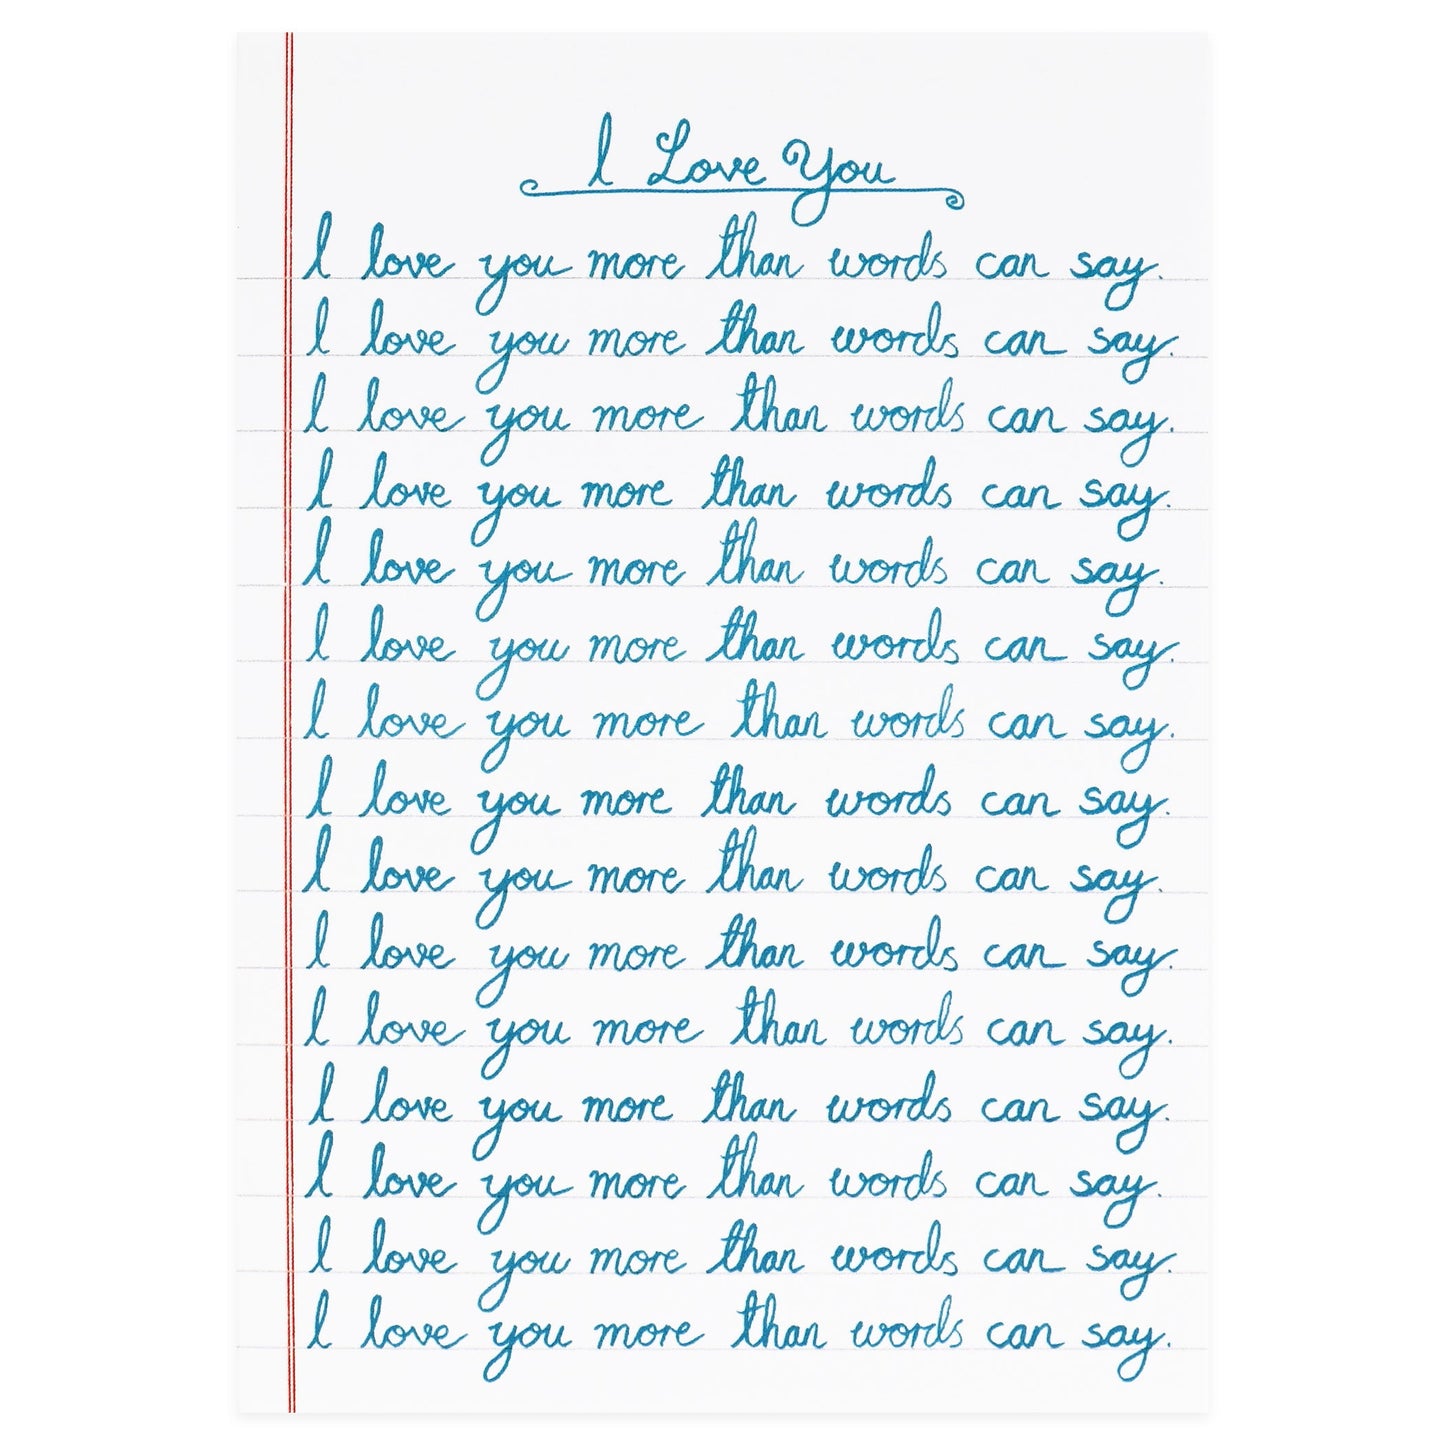 Sukie I Love You More Than Words Can Say Greeting Card 